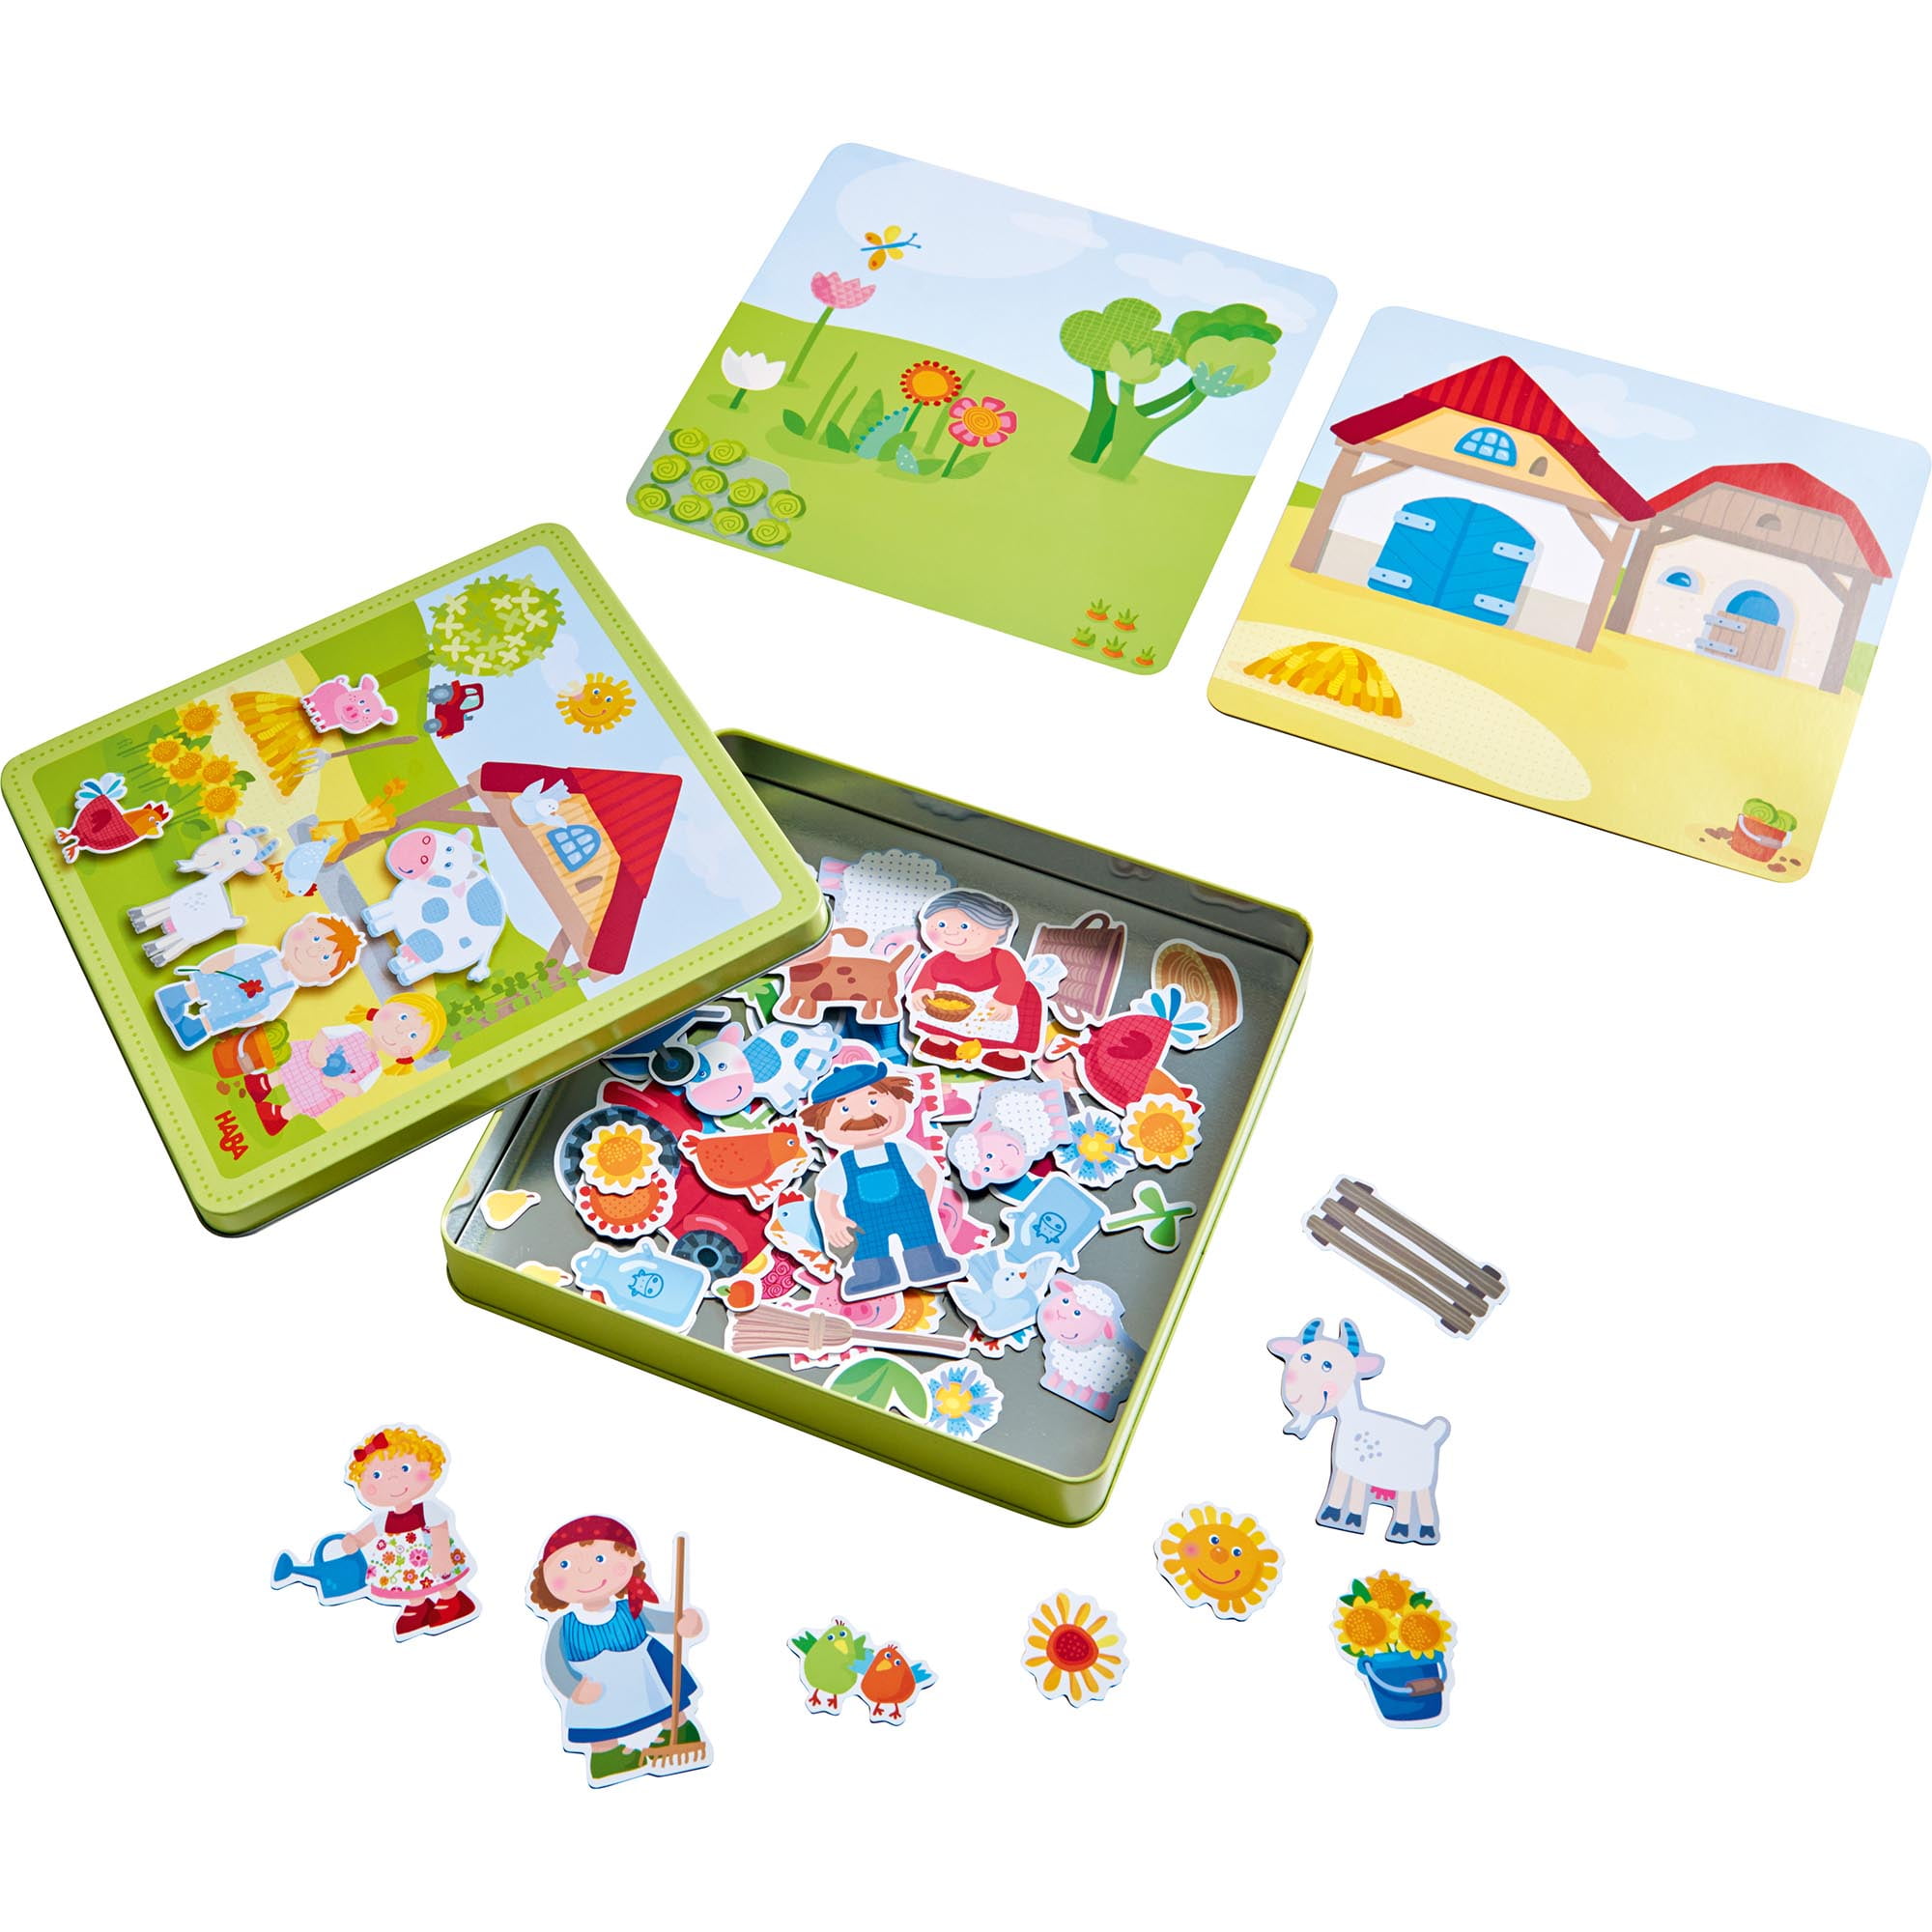 Haba Magnetic Game Box Dress-Up Doll LilliMagnetic Travel Games7392, 